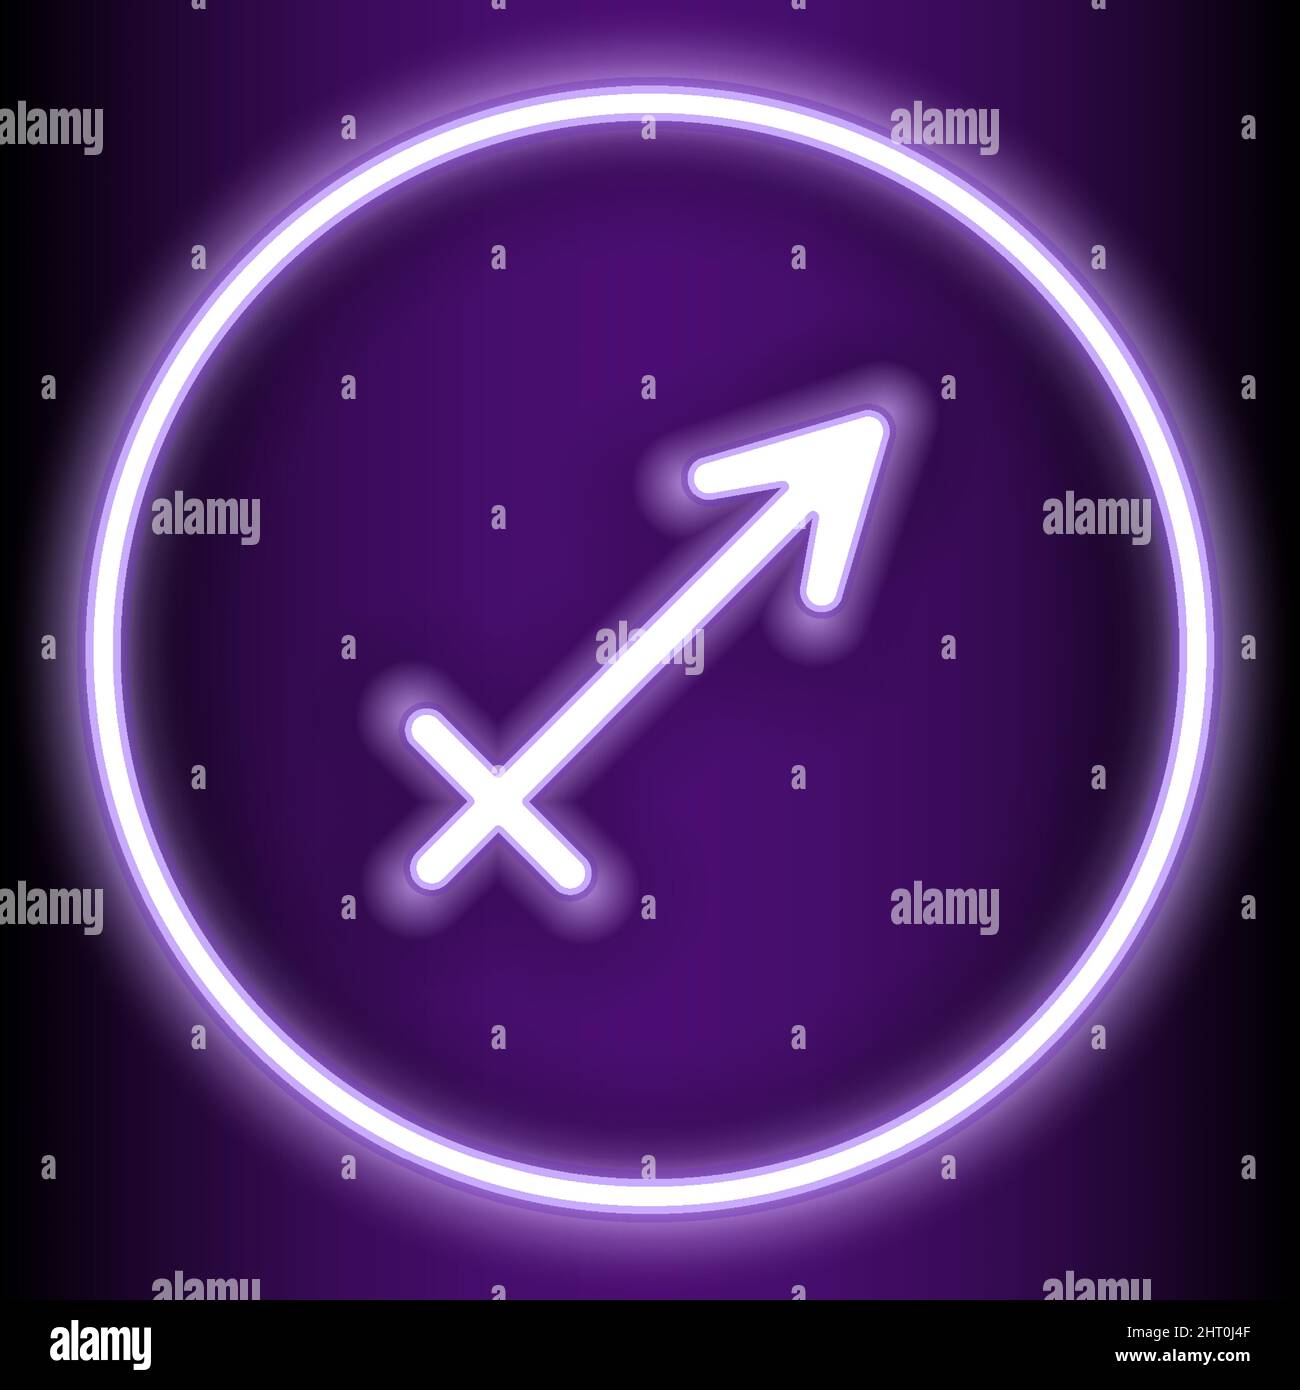 Sagittarius is one of the 12 zodiac signs and is shown in a purple neon style. can be used to embellish the backdrop or publications in a variety Stock Vector